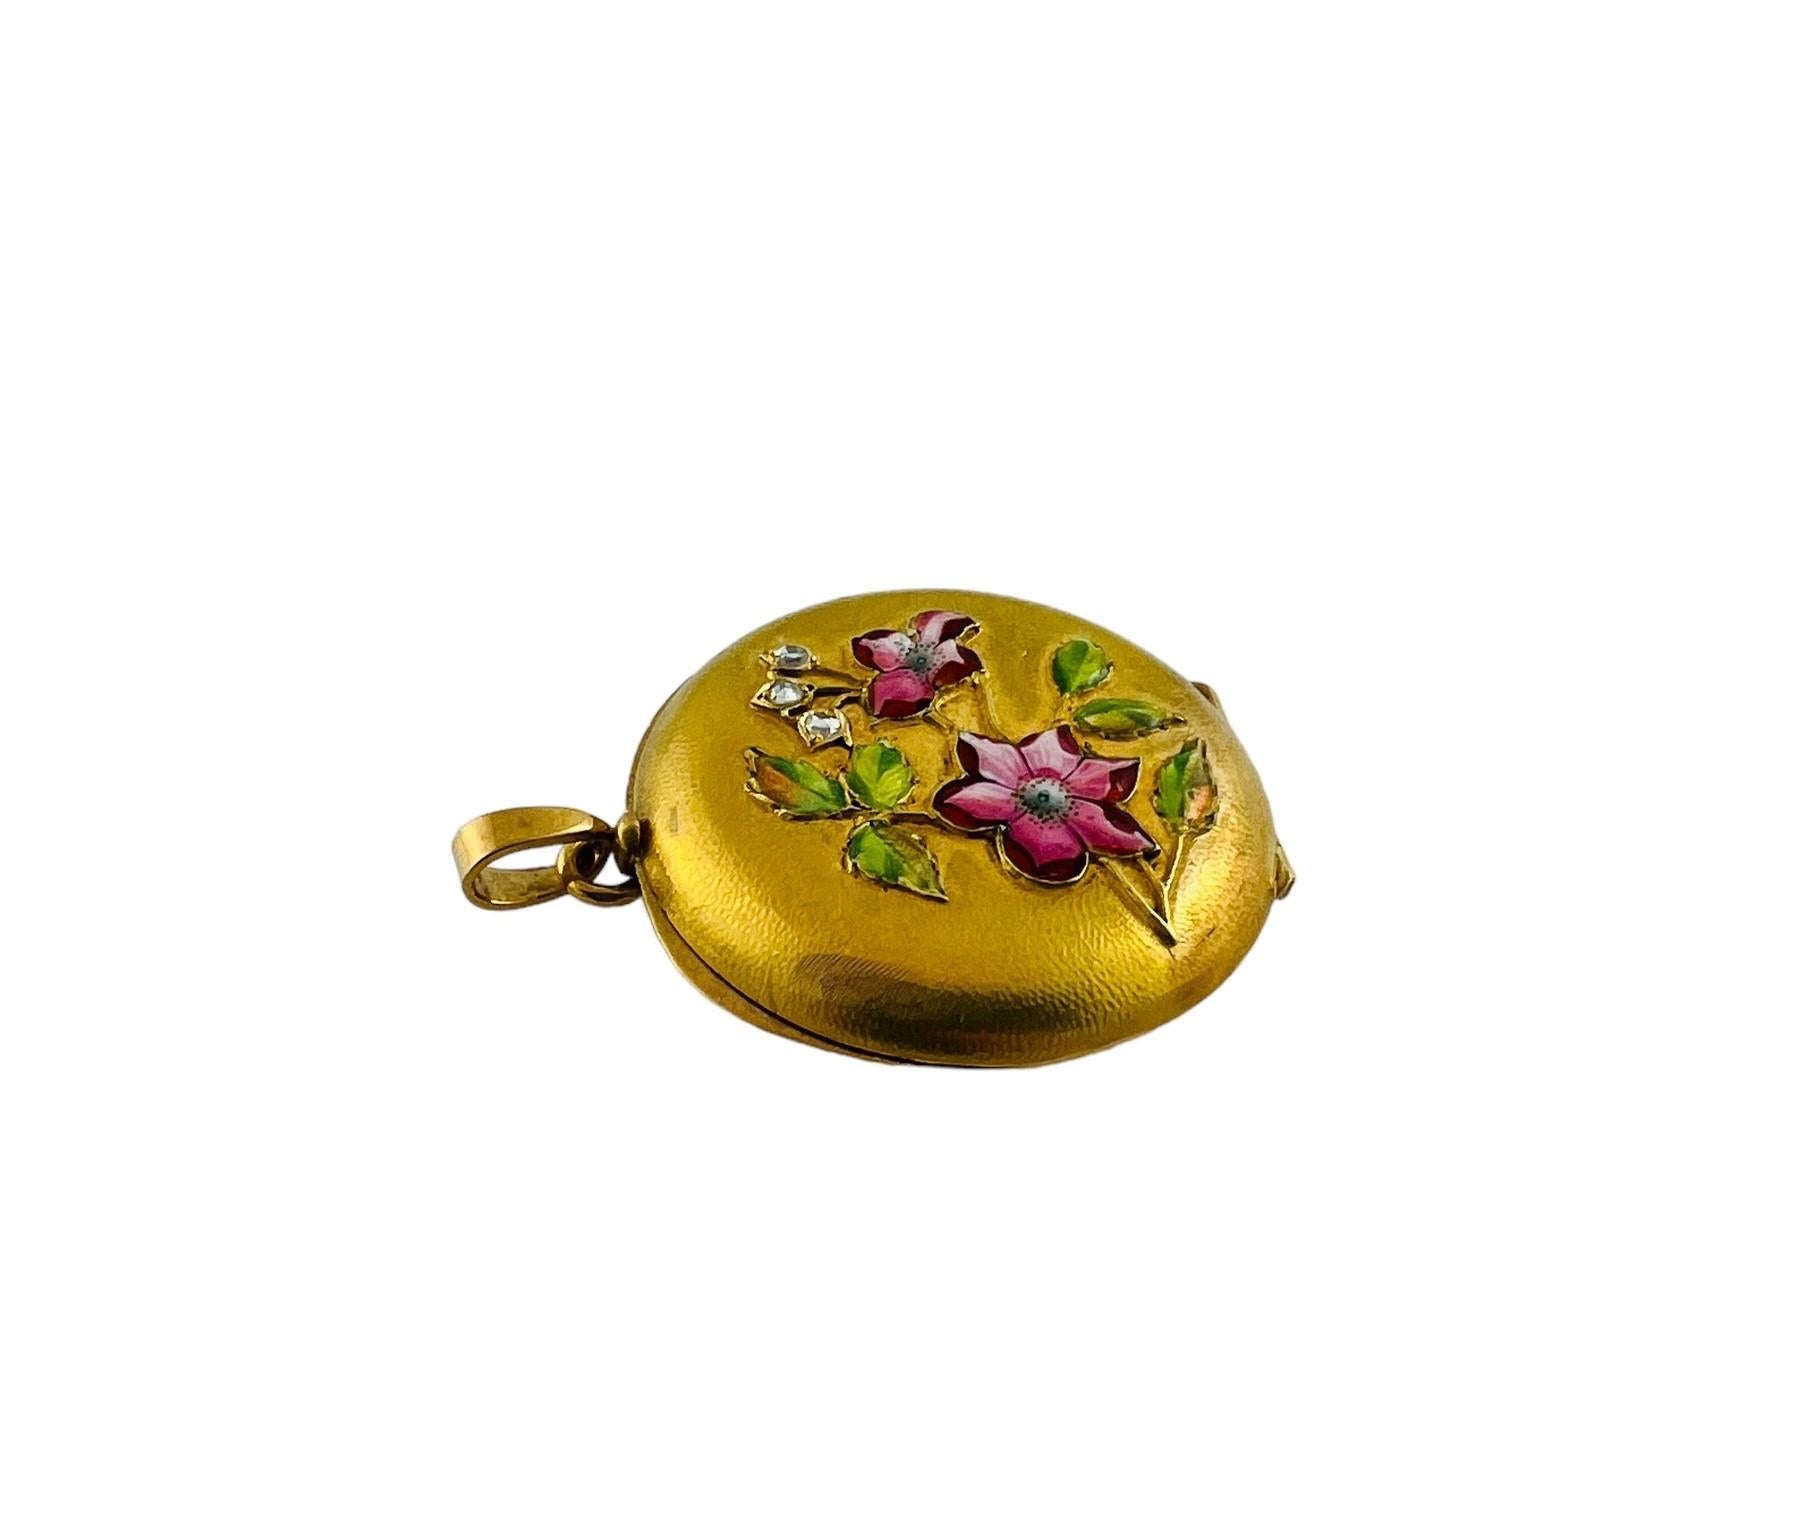 18K Yellow Gold and Enamel Round Locket with Floral Design #16549 For Sale 3